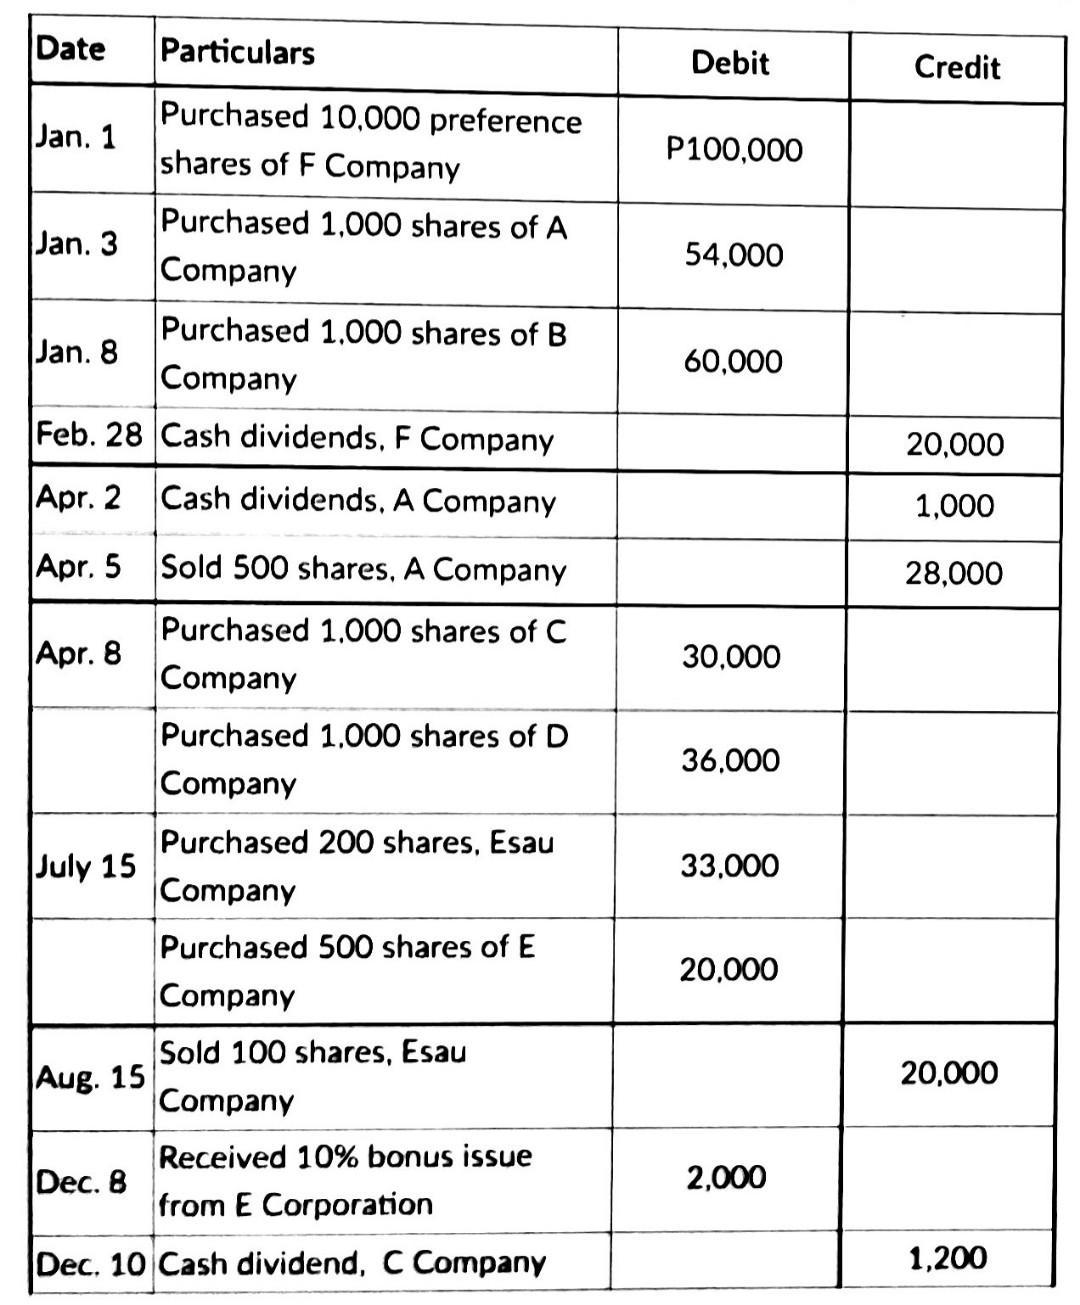 Date Particulars Debit Credit Jan. 1 Purchased 10,000 preference shares of F Company P100,000 54,000 Purchased 1,000 shares o